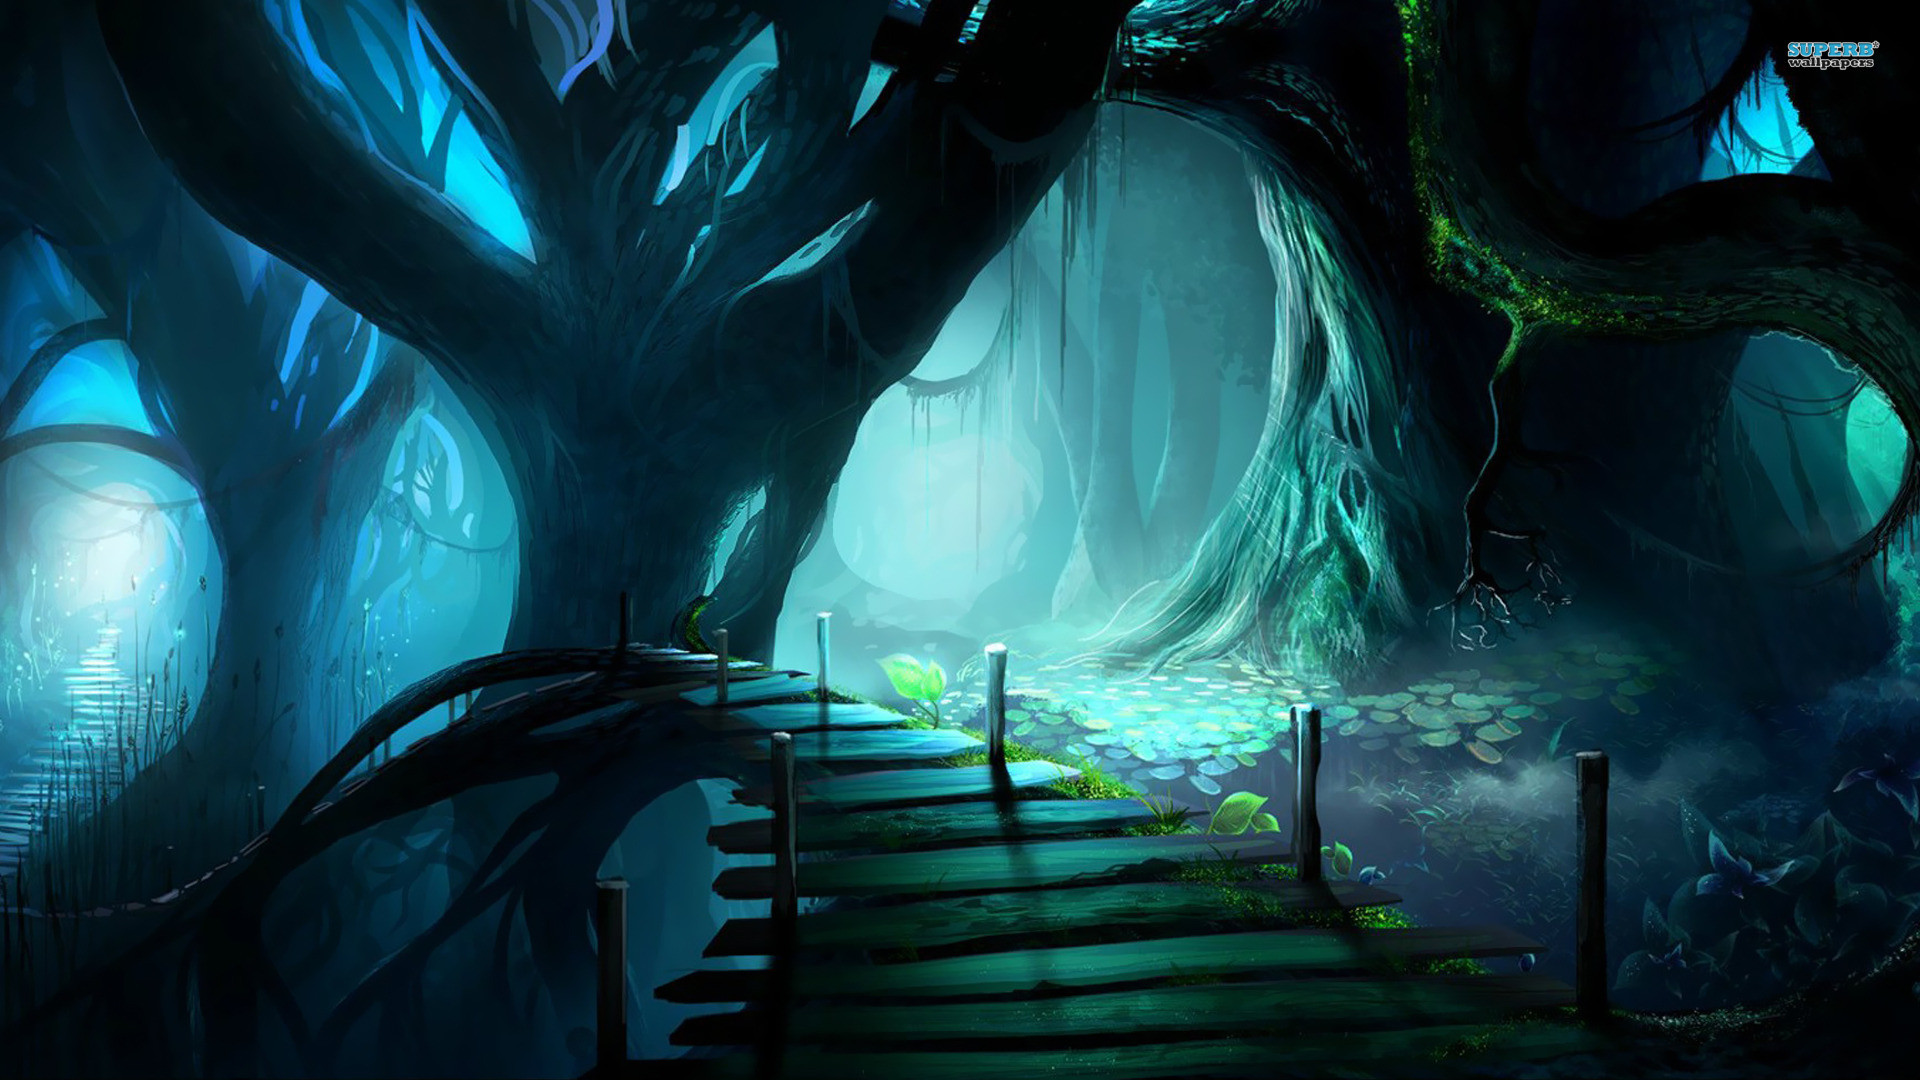 1920x1080 Druid forest / Path in a scary forest wallpaper